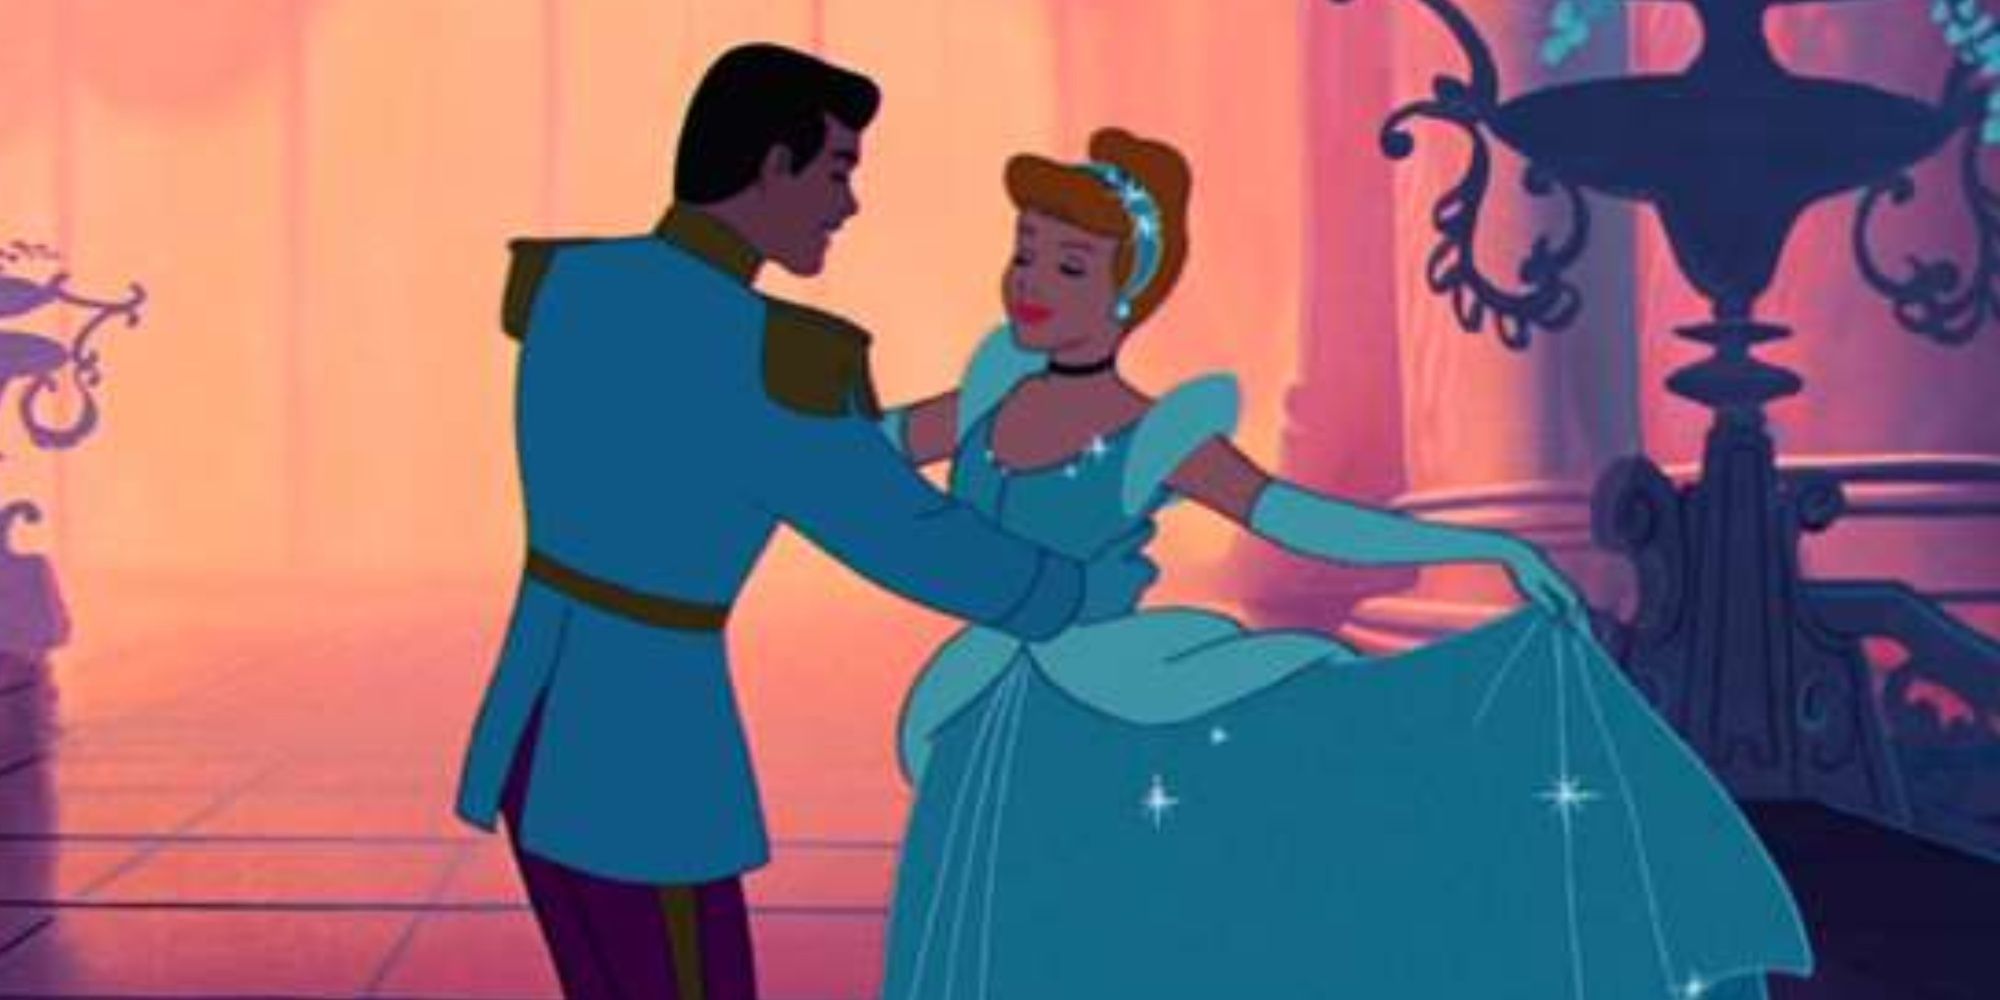 This Is Love - clip of Cinderella, Cinderella and the Prince at the Dance, cropped